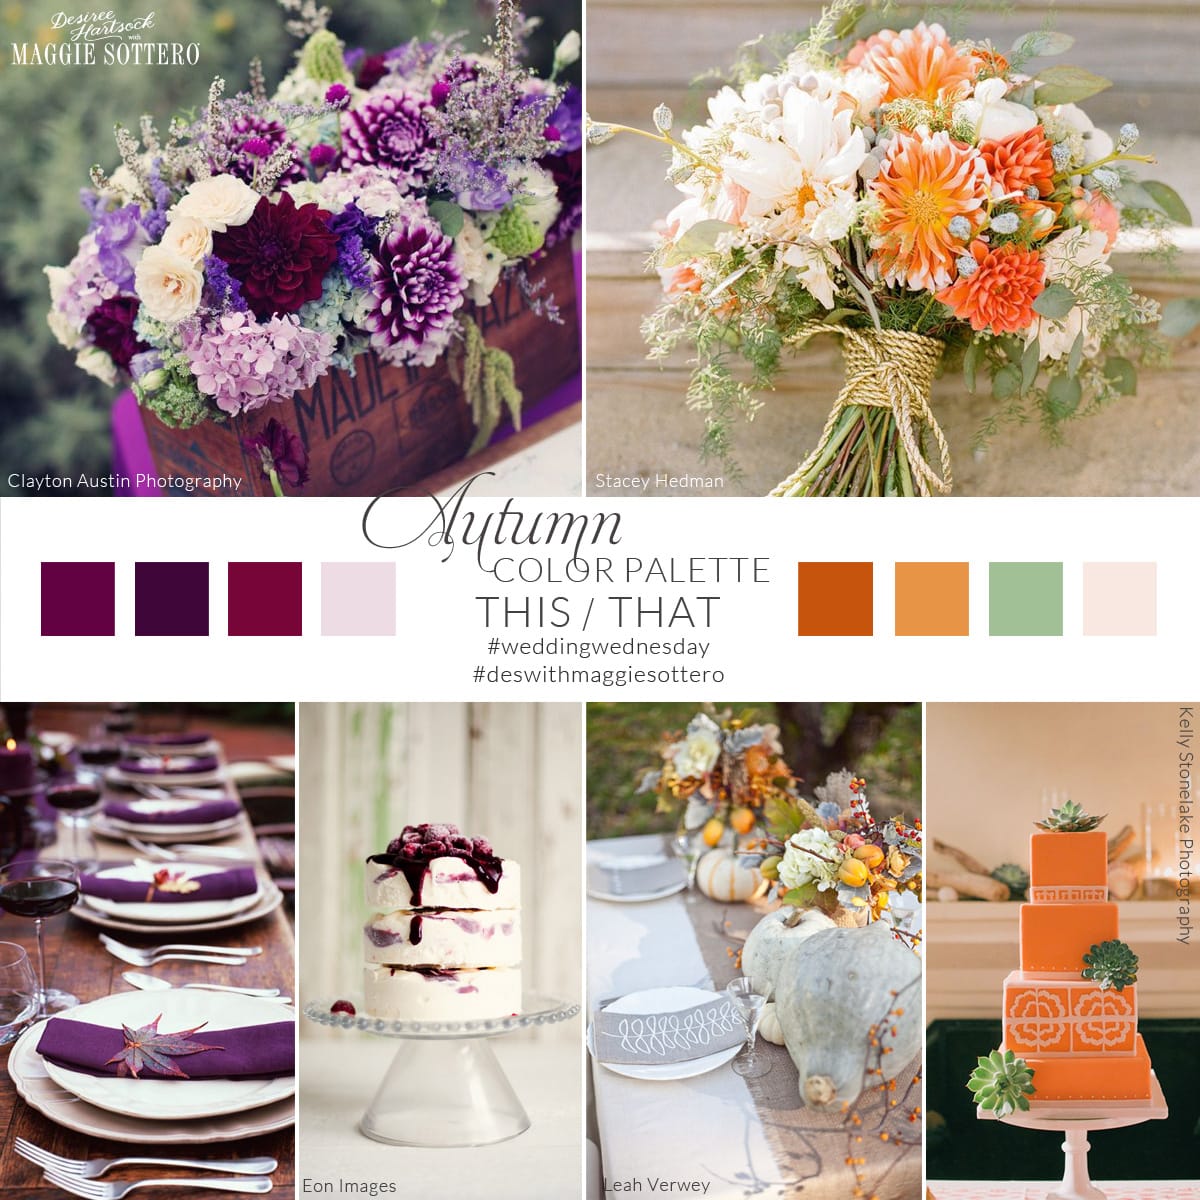 Wedding Wednesday with Desiree: Fall Wedding Colors - Love Maggie